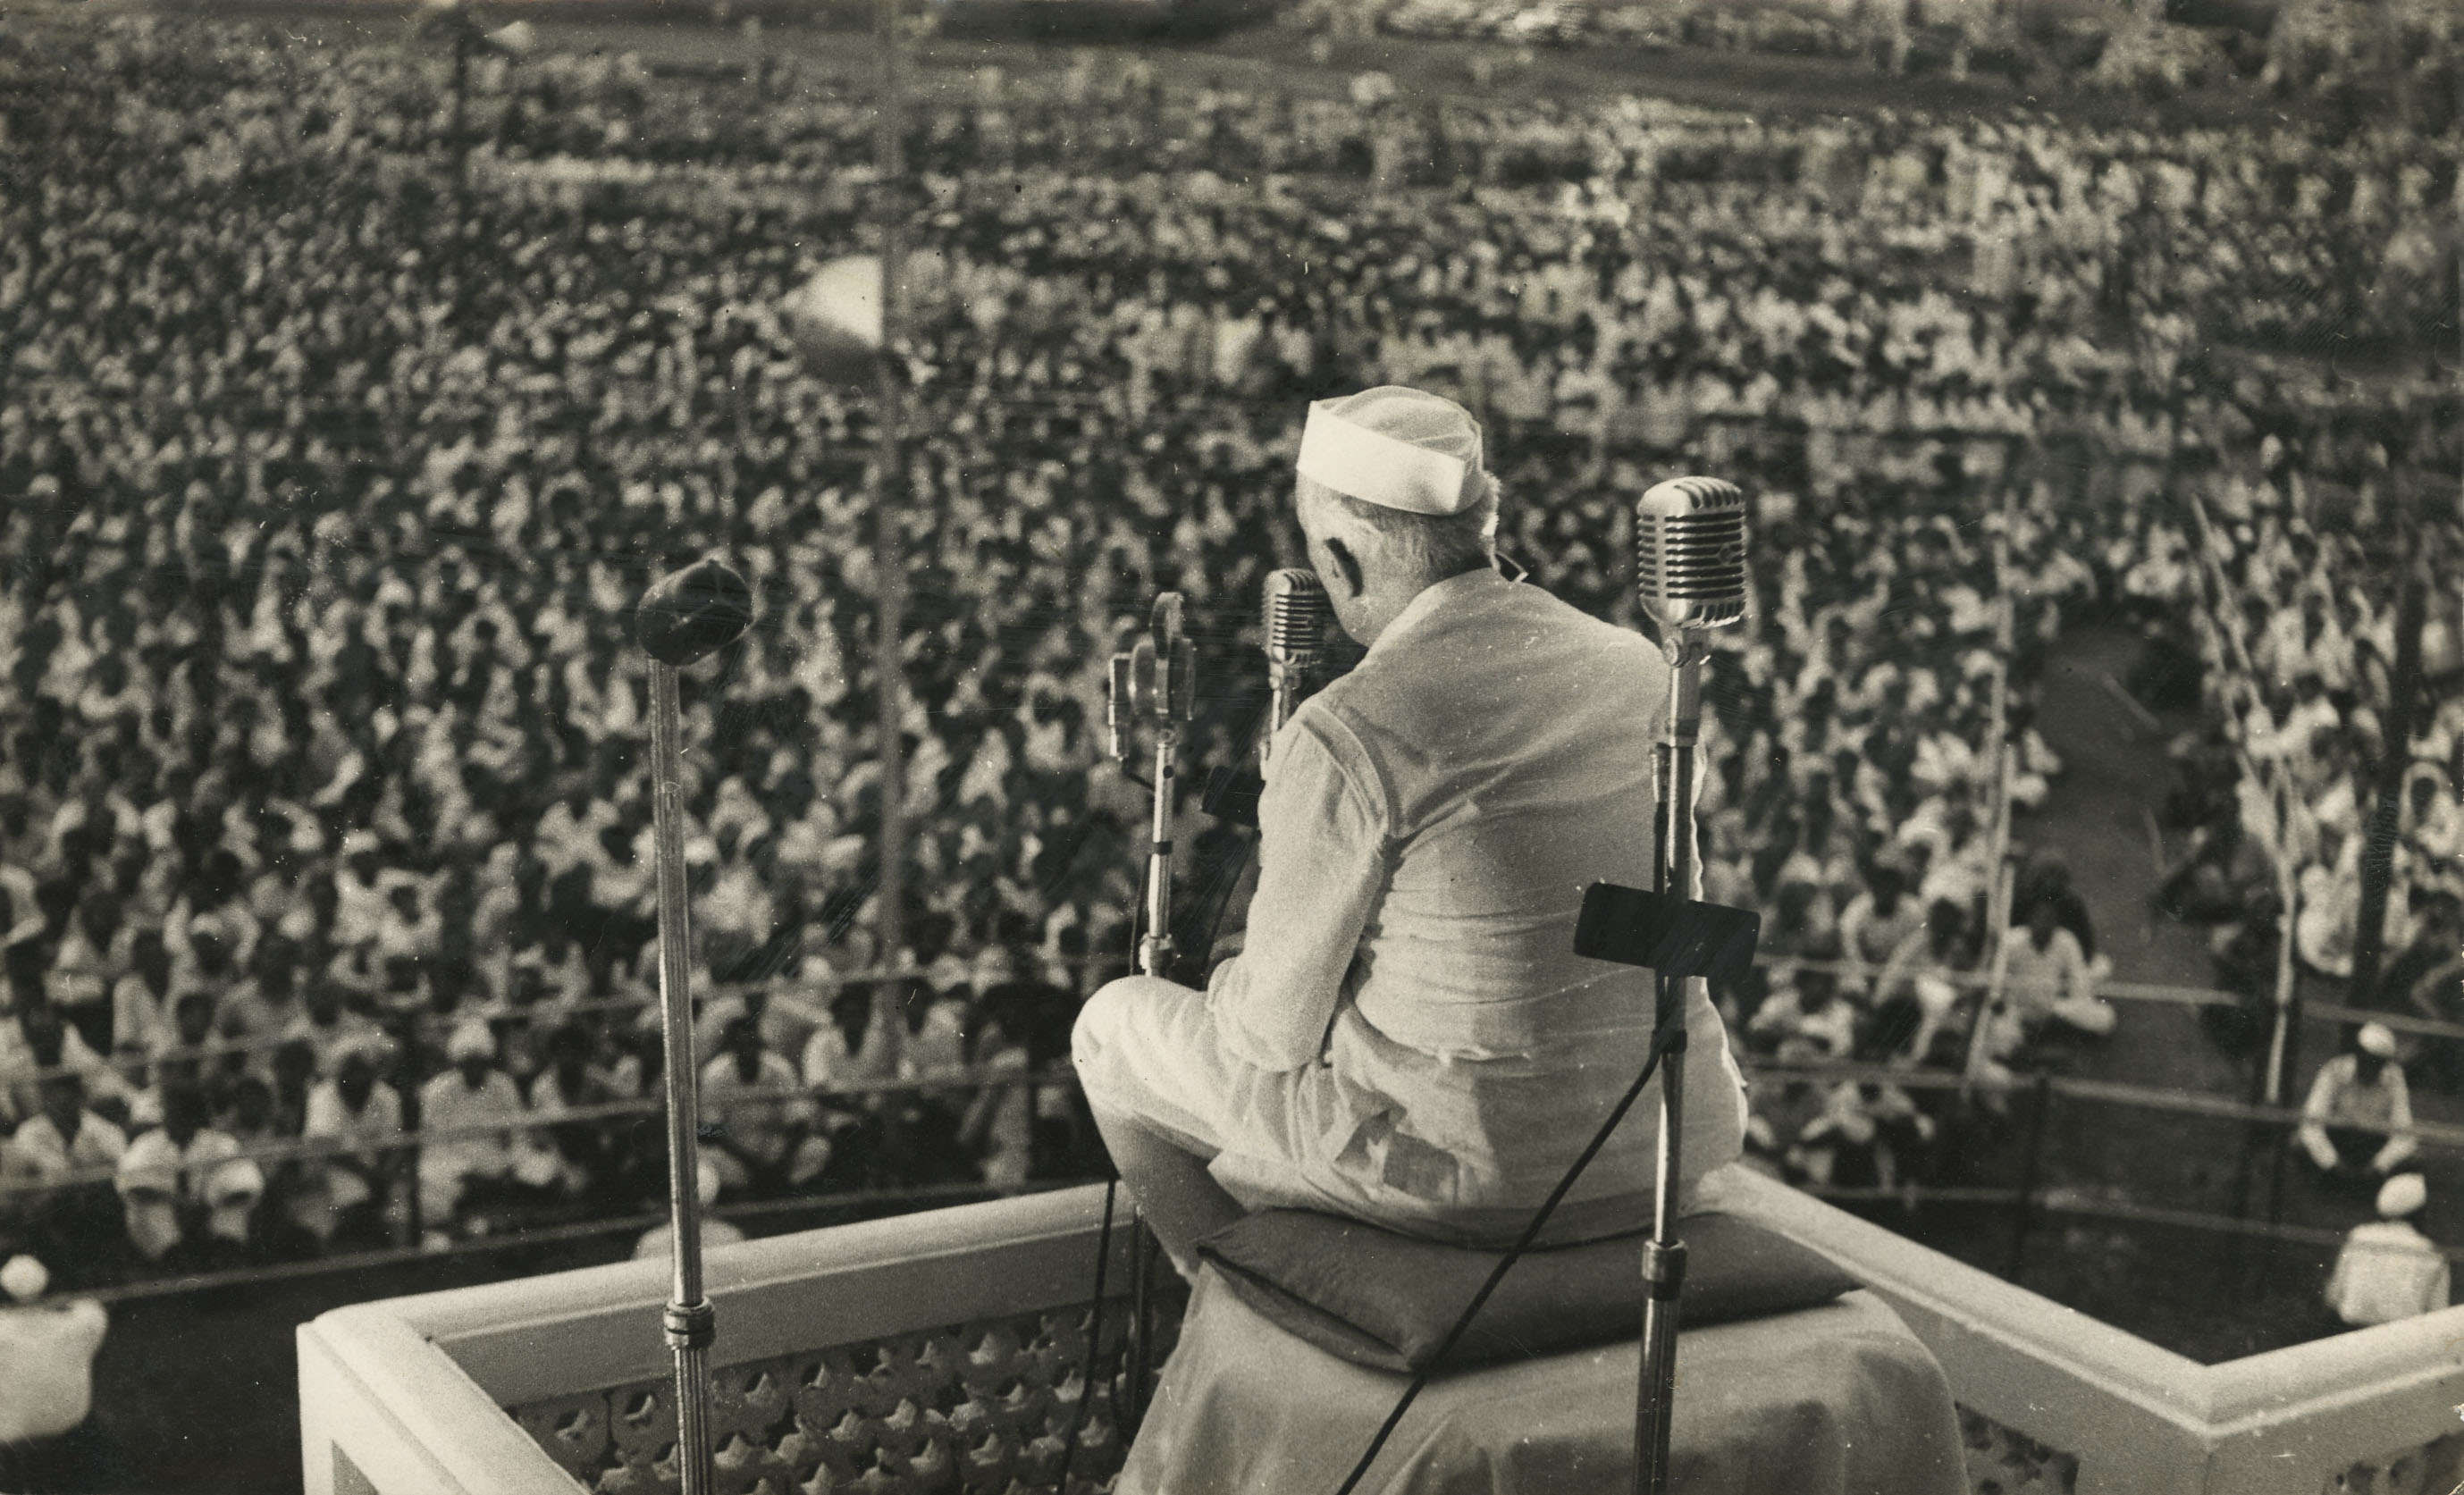 Prime Minister Pandit Jawaharlal Nehru addressing a public meeting on Ramlila Grounds in New Delhi on June 20, 1956, on the eve of his departure for Europe.